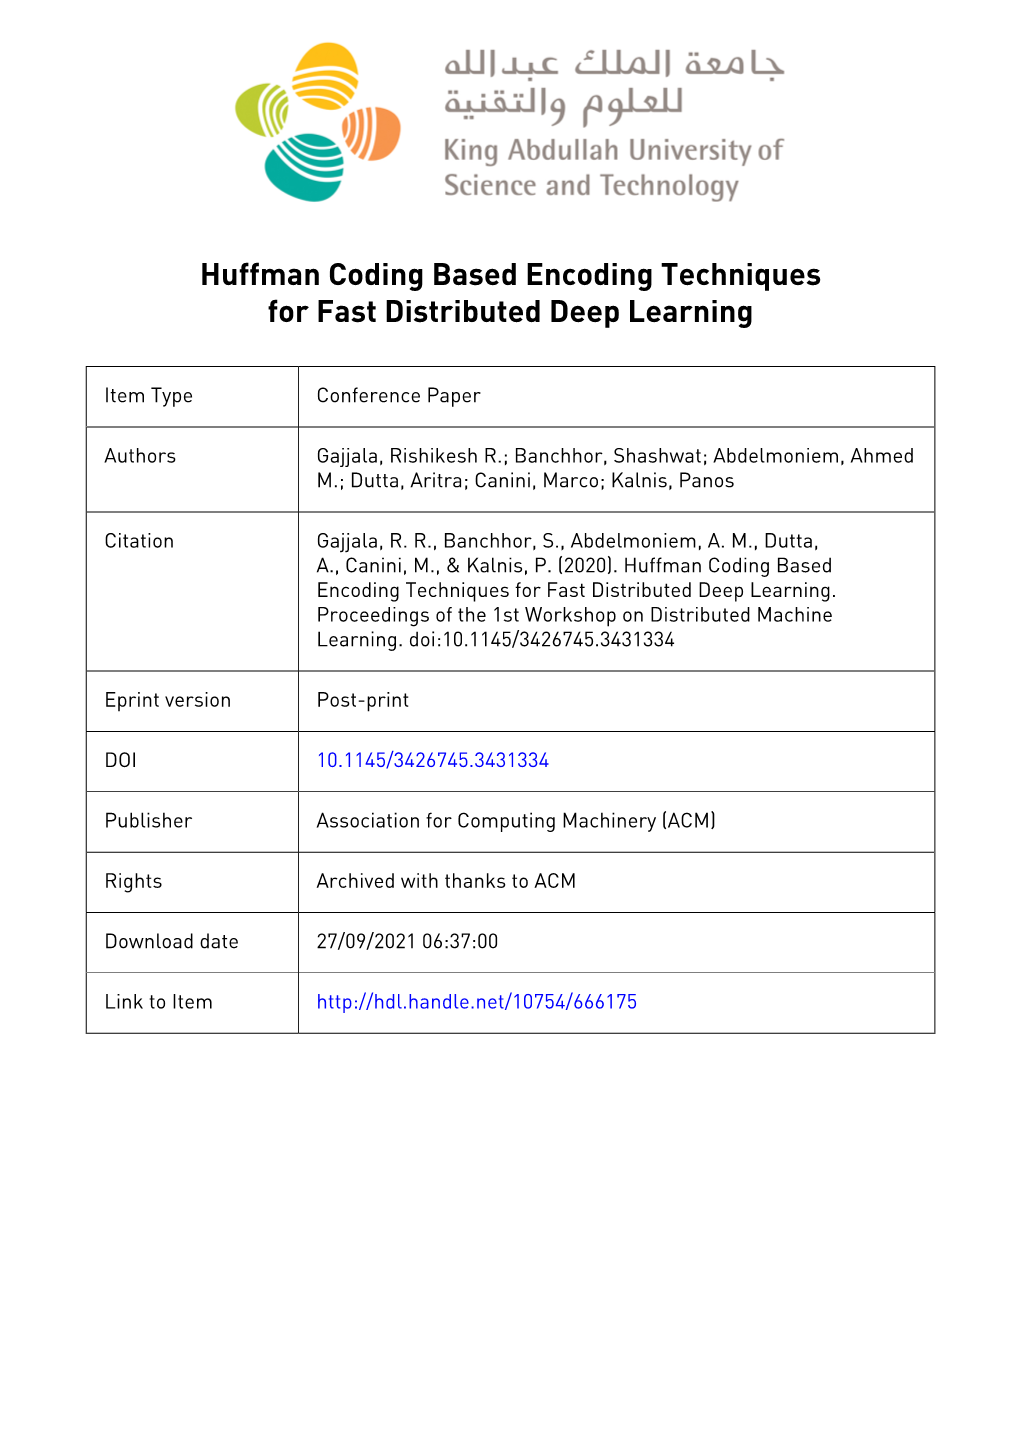 Huffman Coding Based Encoding Techniques for Fast Distributed Deep Learning